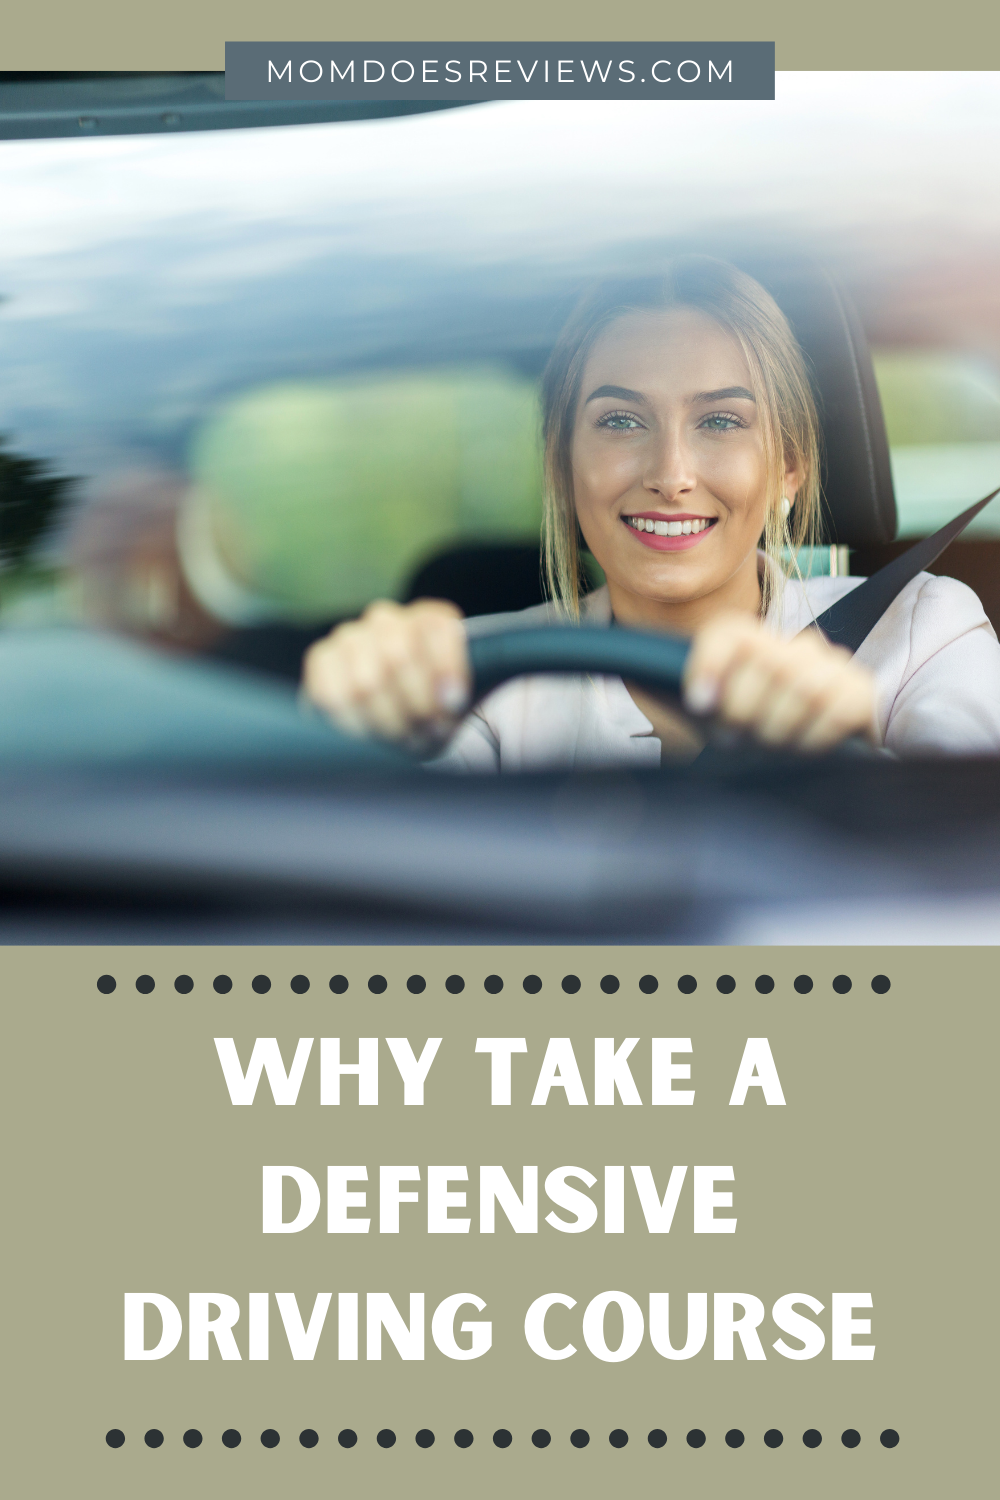 Benefits of Taking a Defensive Driving Course